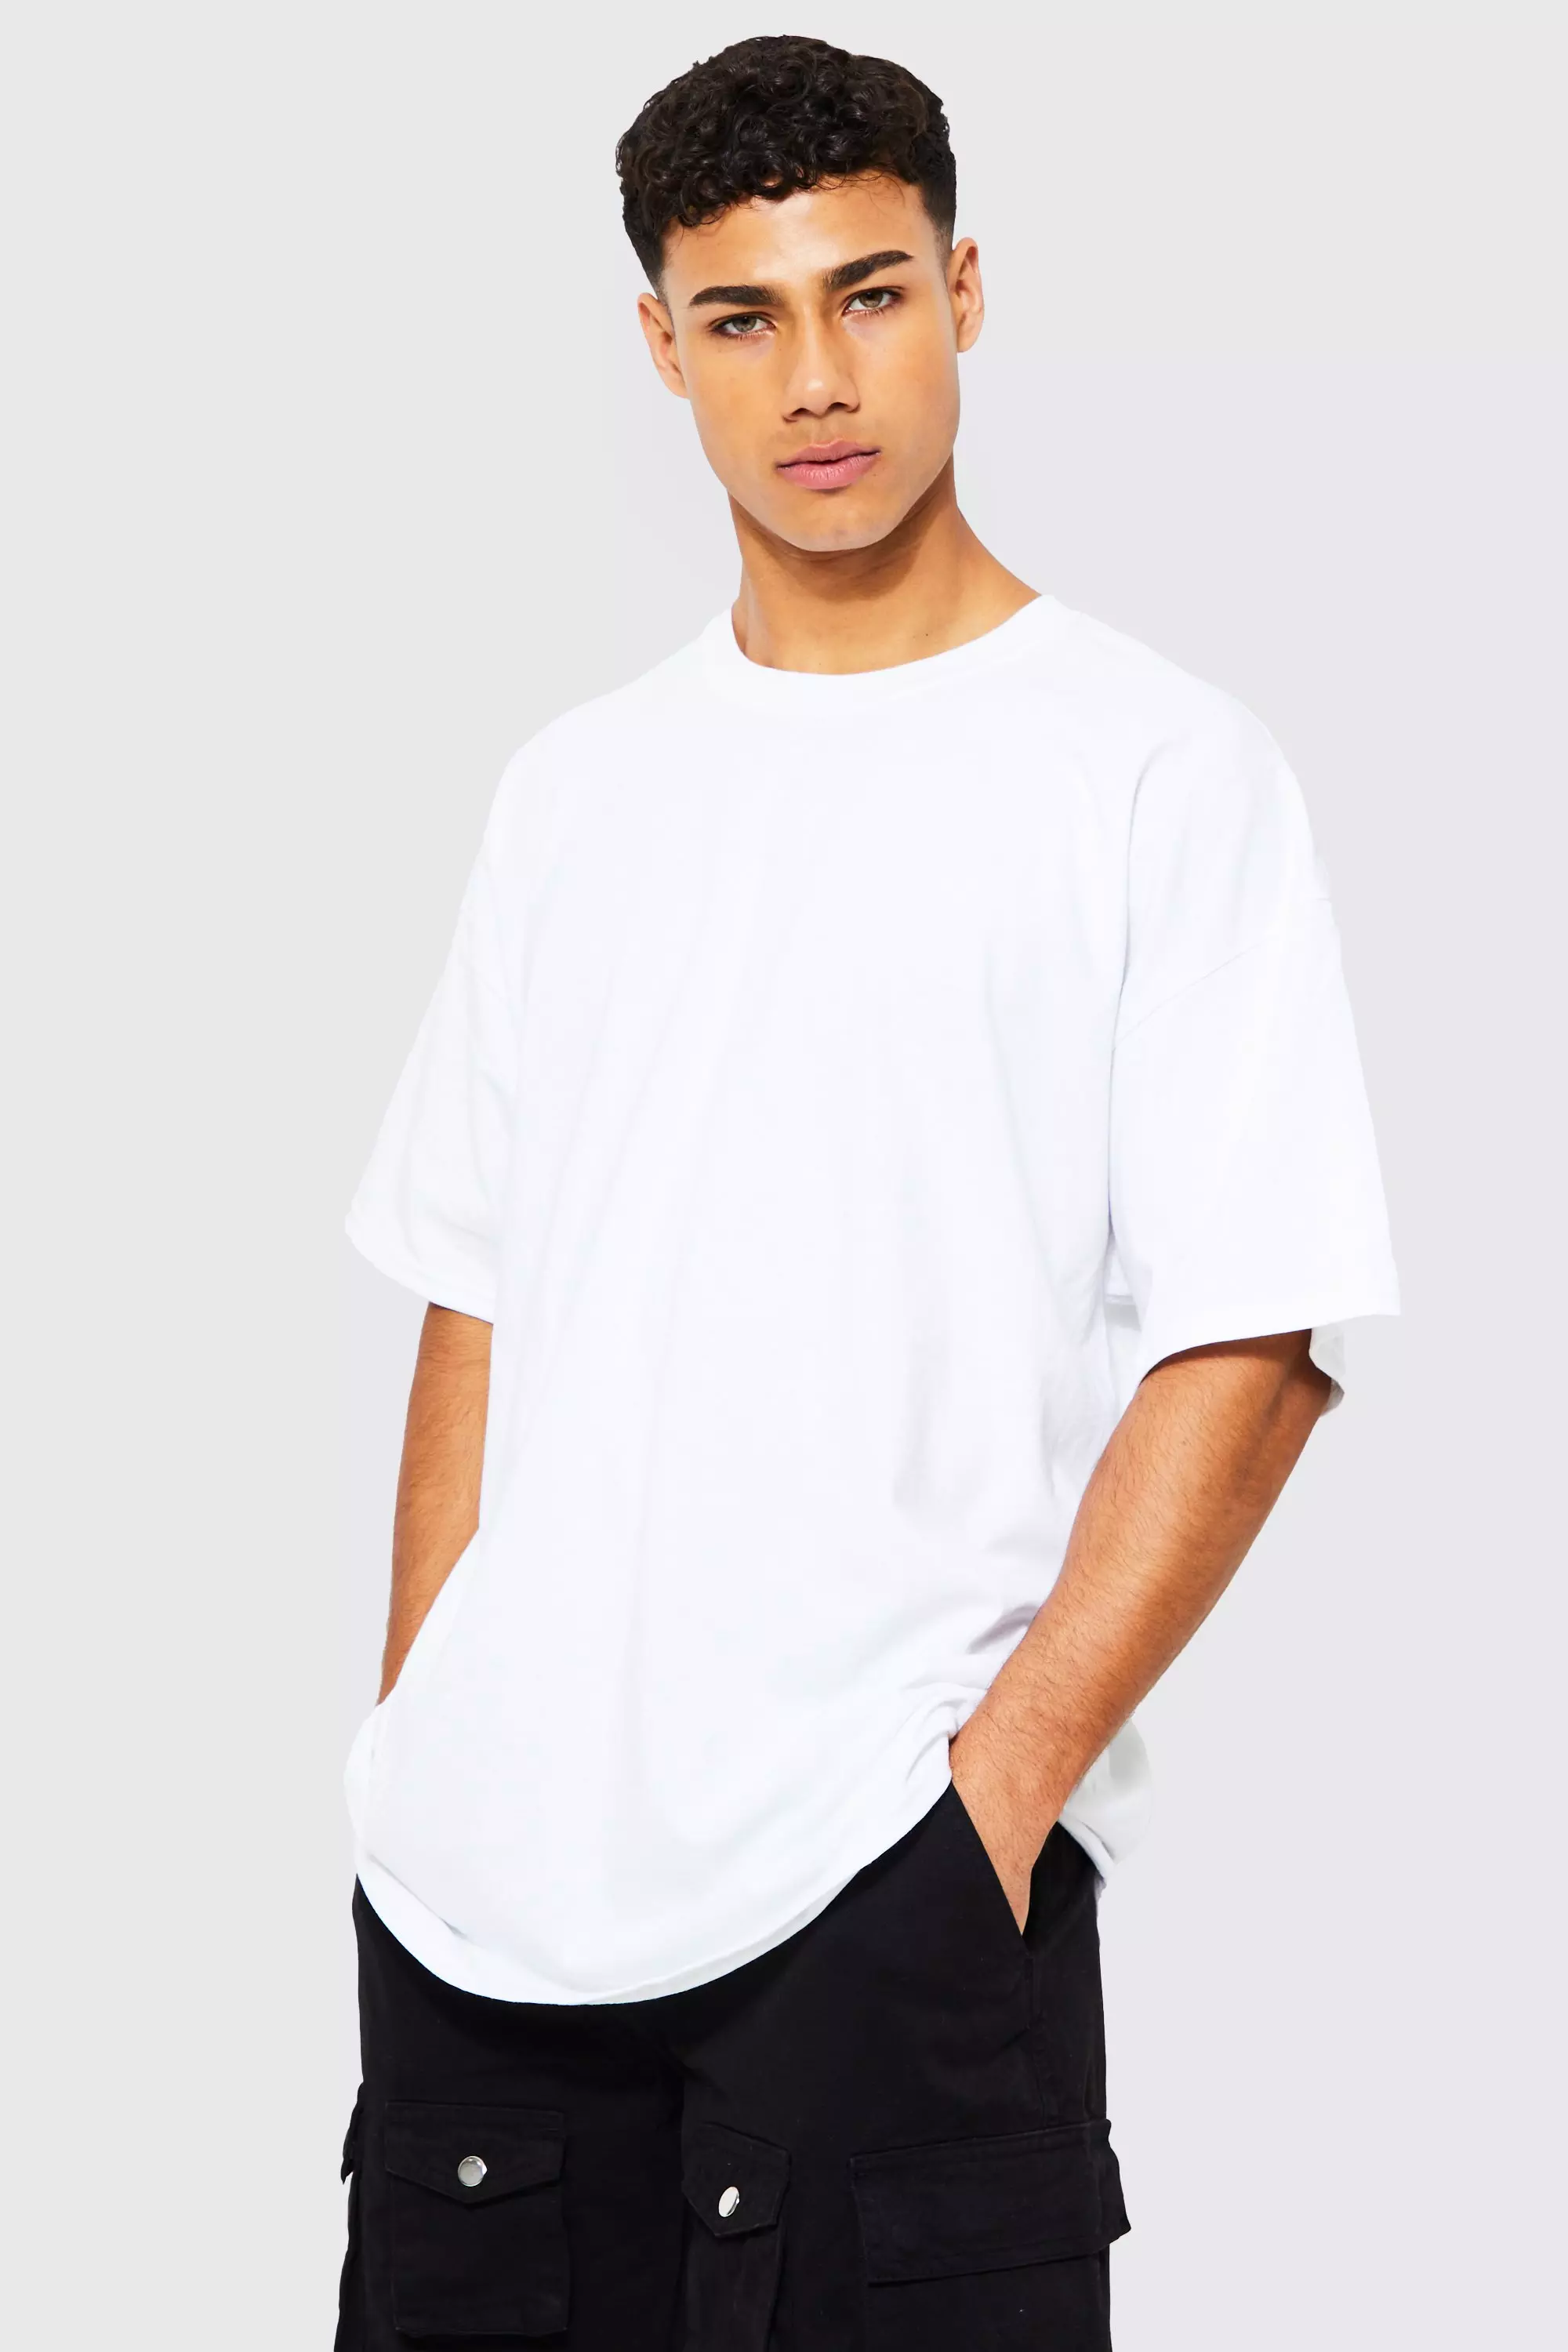 ASOS DESIGN oversized T-shirt in off-white with New York city print